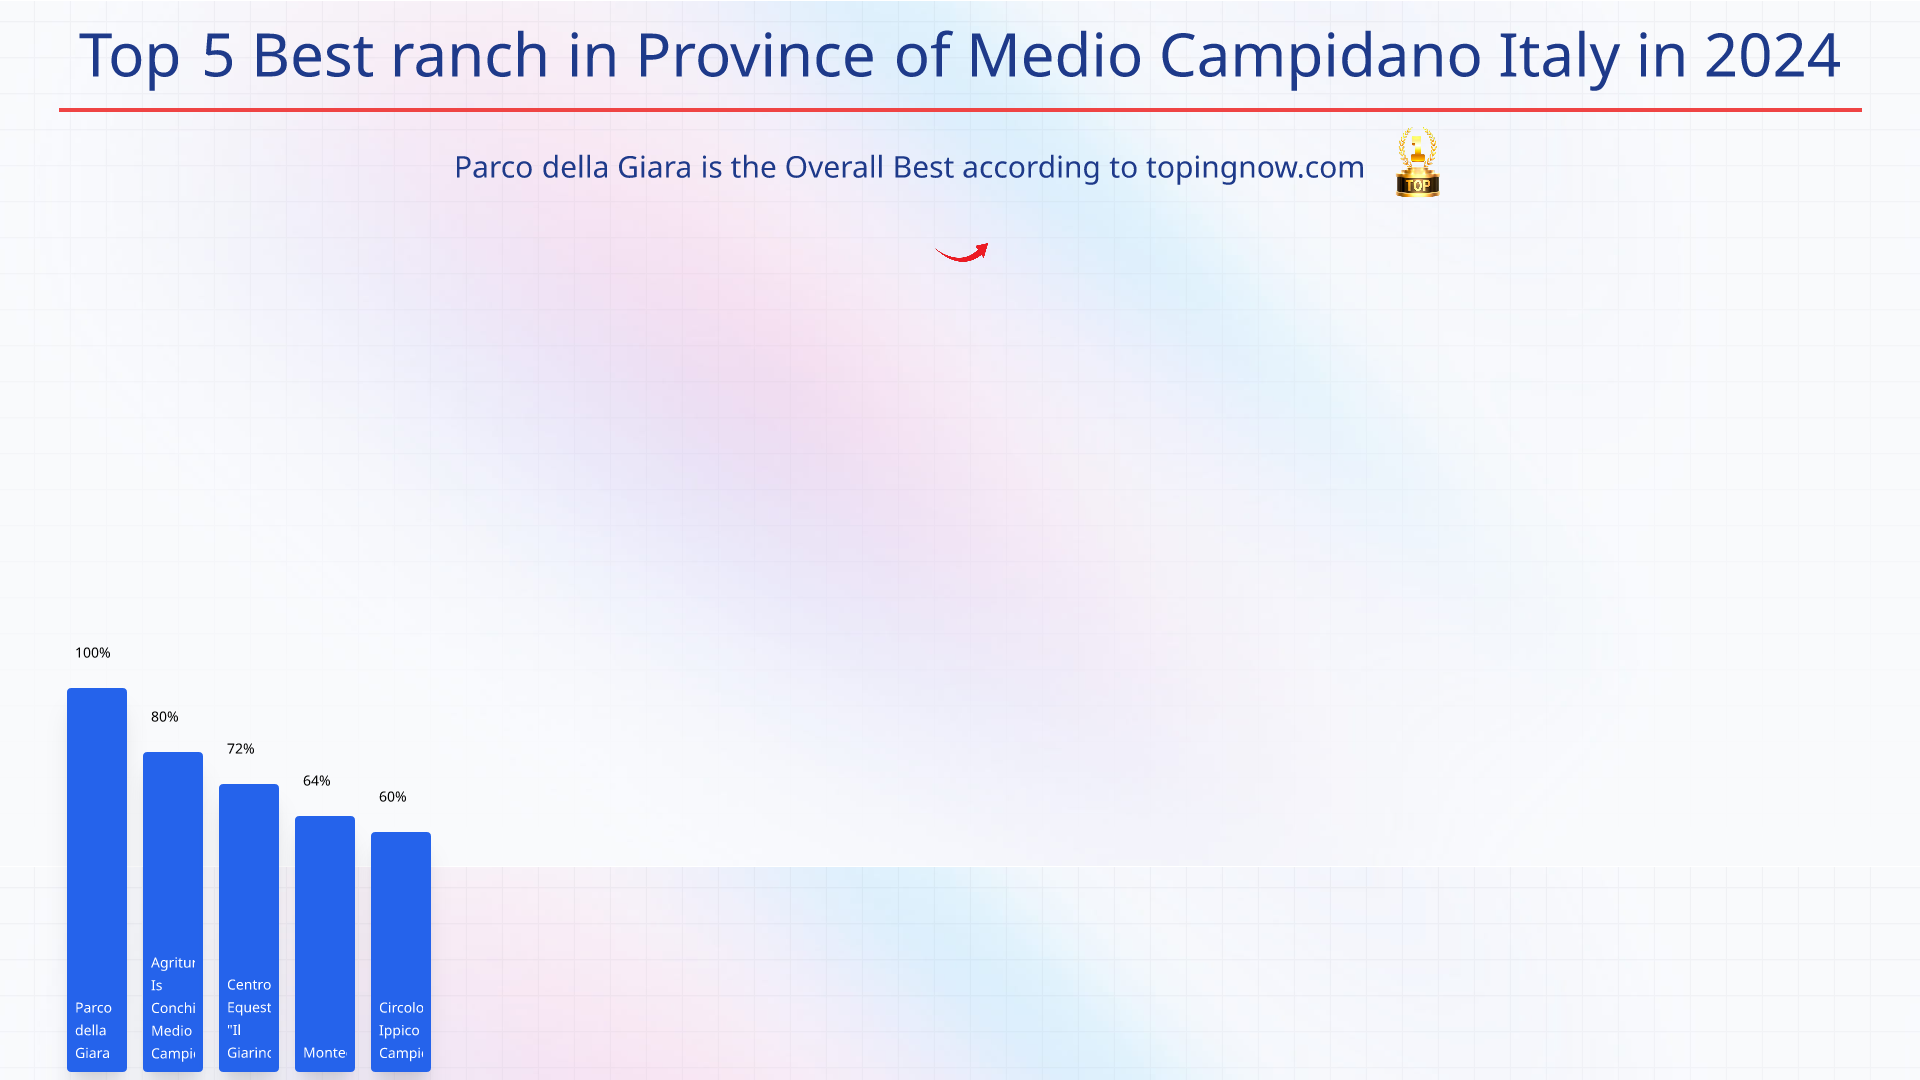 Top 5 Best ranch in Province of Medio Campidano Italy in 2024: Top 5 Best ranch in Province of Medio Campidano Italy in 2024